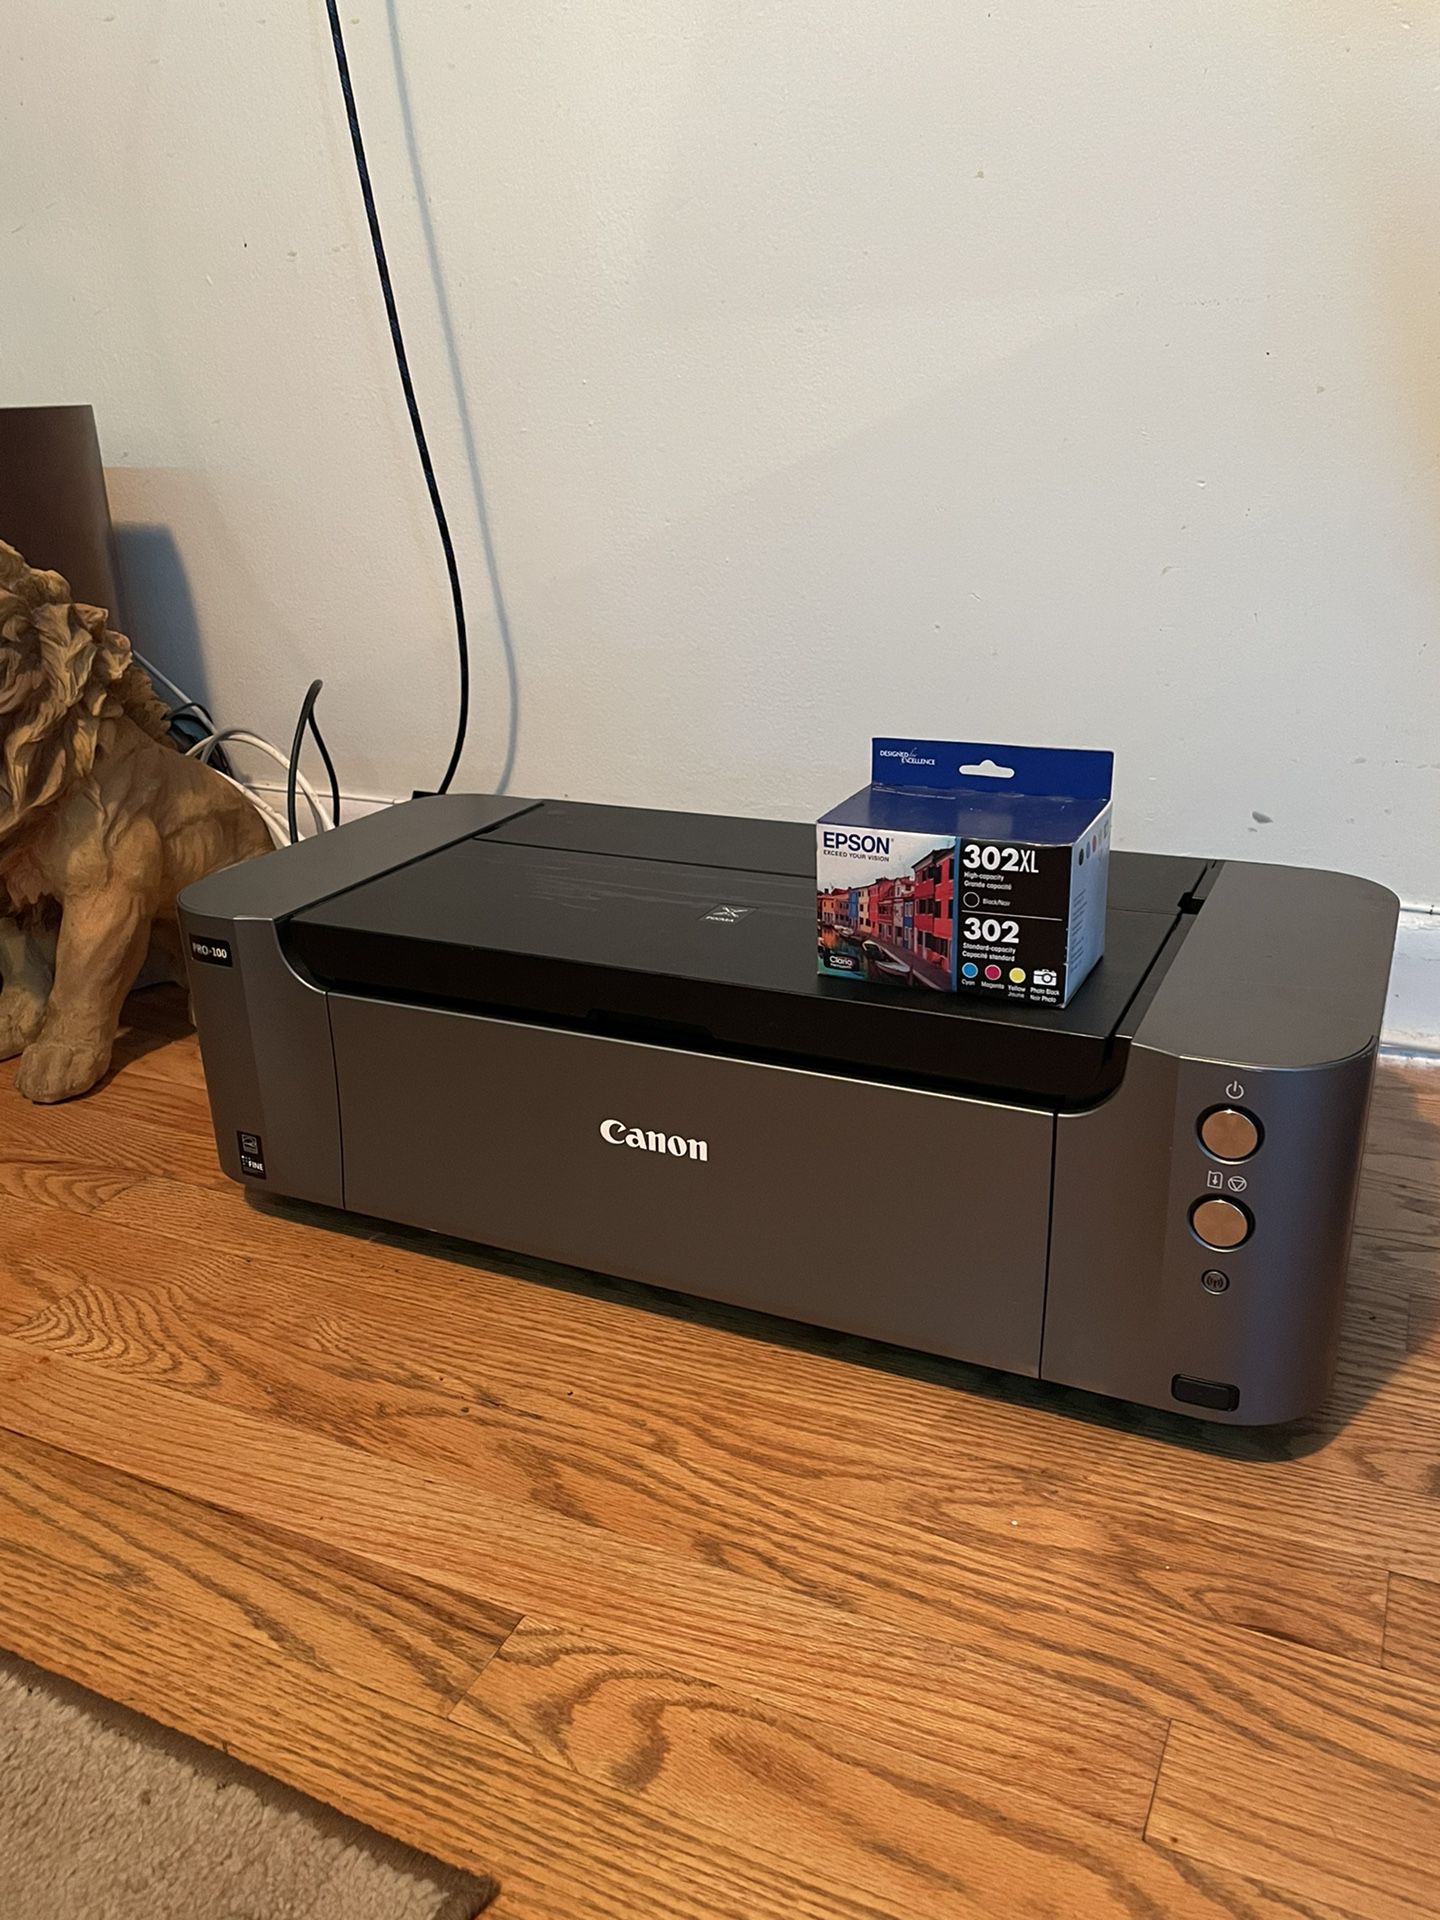 Canon Pixma Wireless Color Inkjet Printer with Airprint and Mobile Device Printing for Sale in Brooklyn, NY - OfferUp